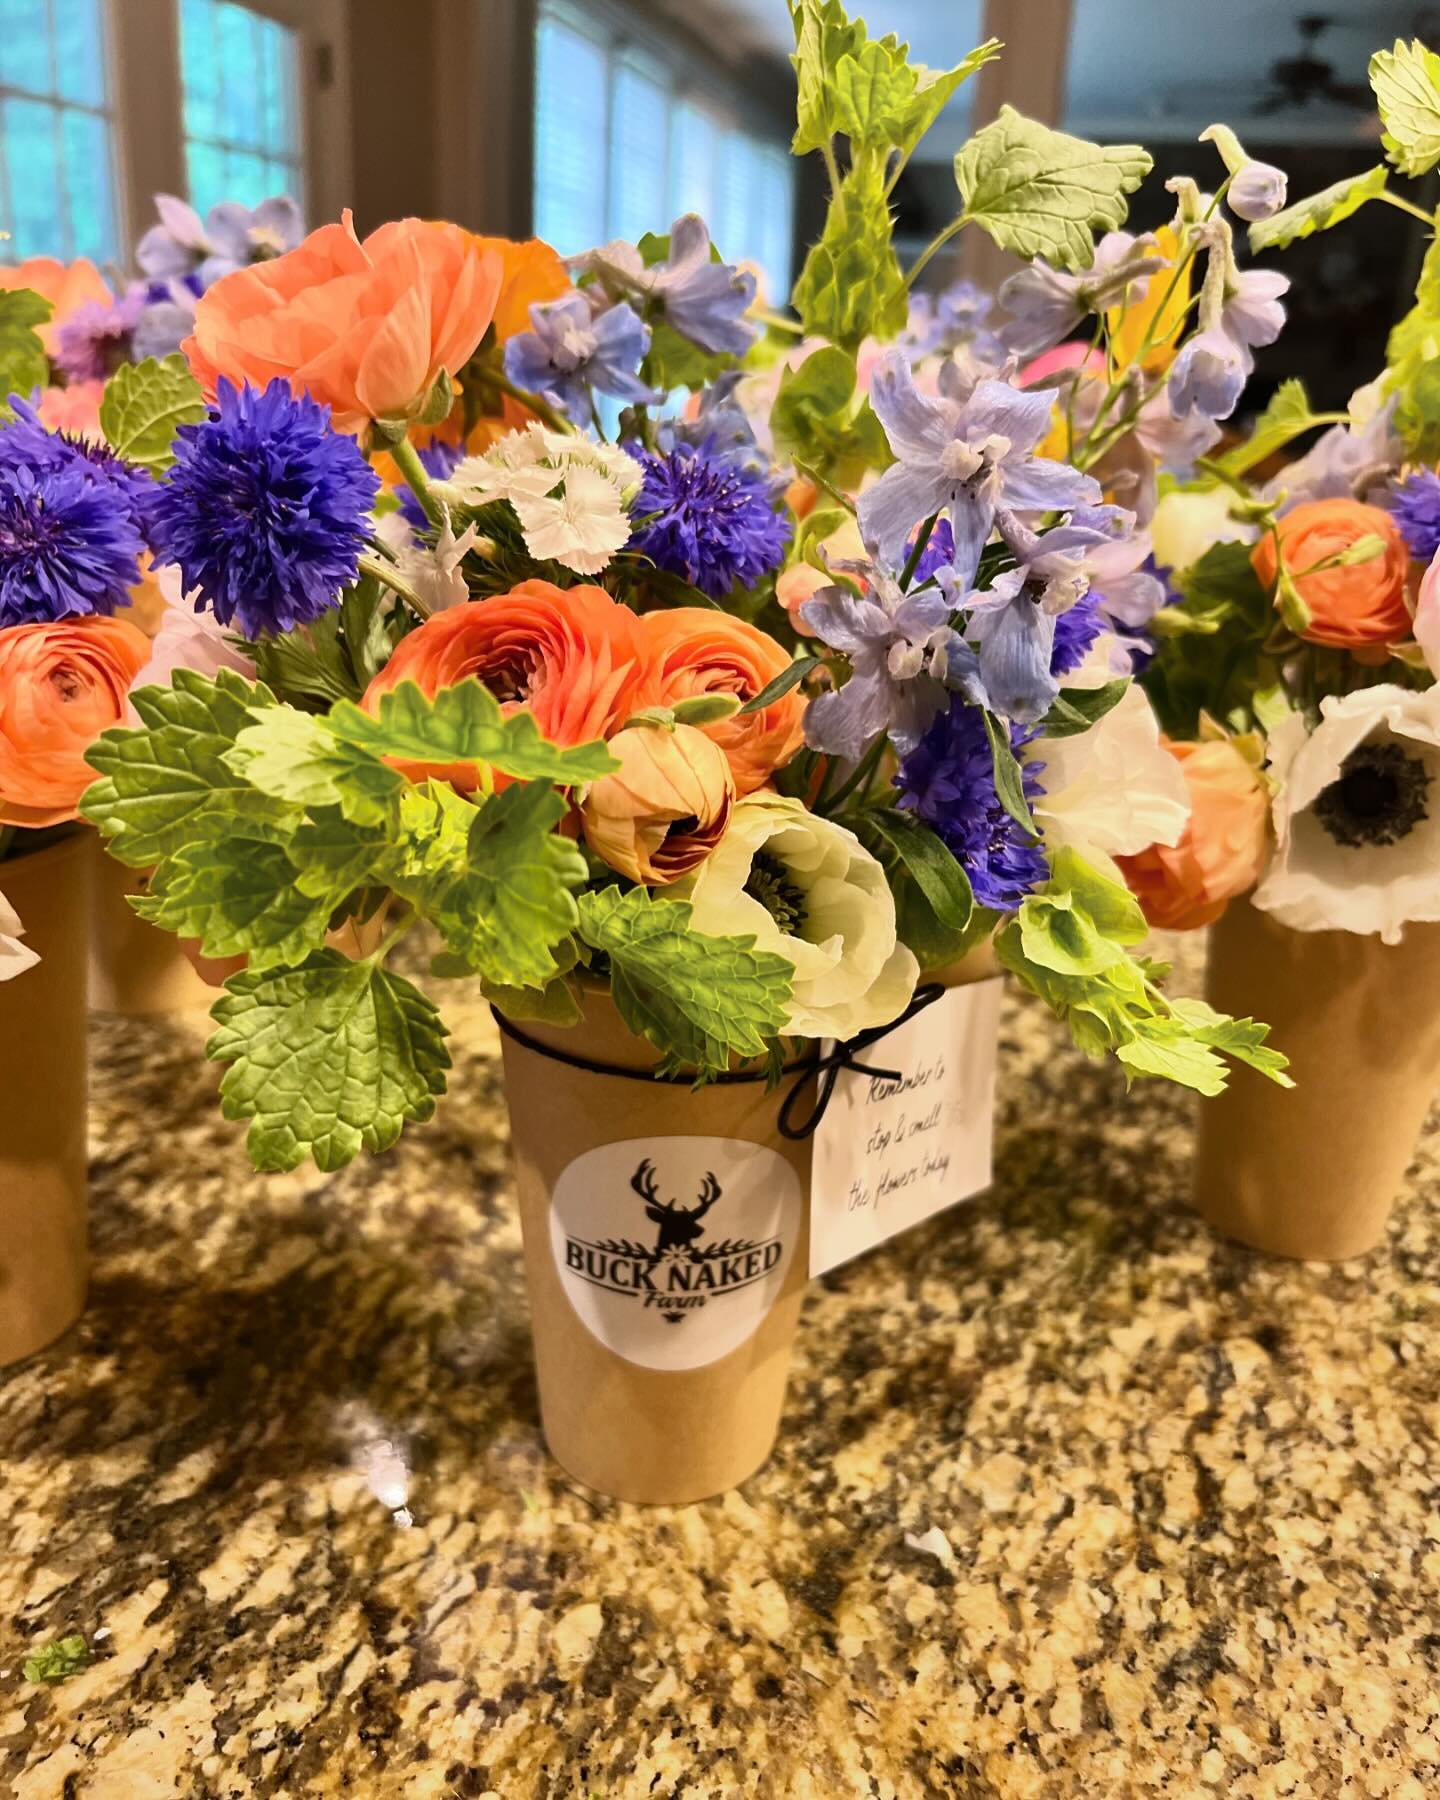 Feedback needed! Like the car-friendly compostable cups? Or prefer our usual Mason jars? Trying something new and portable for the flower stand tomorrow. 

Comment below or Poll on our stories. 

Flower stand is open 10-4 Saturdays &amp; Sundays. We 